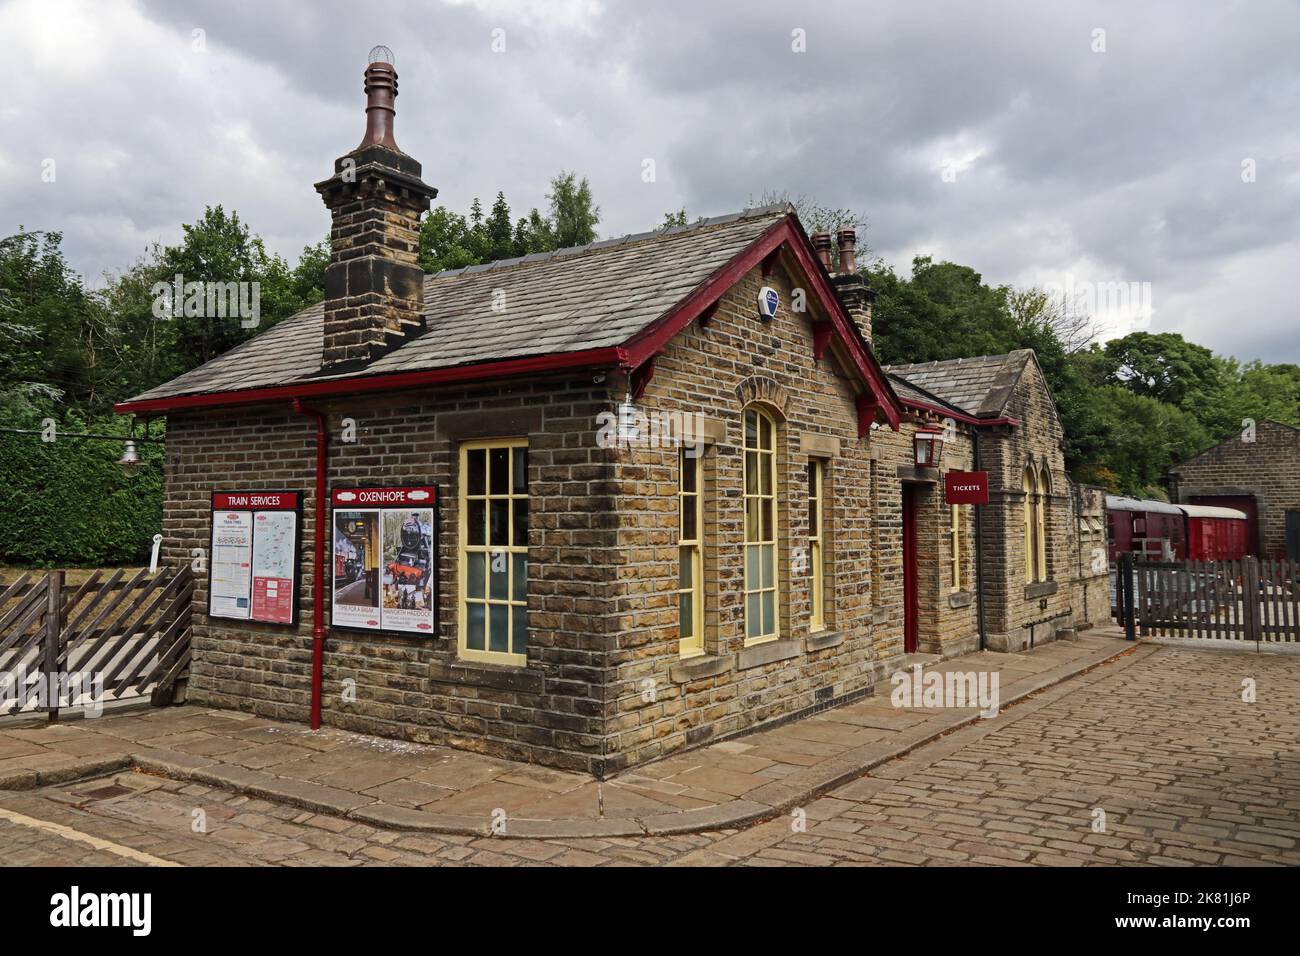 Exterior view of Oxenhope Station on Keighley & Worth Valley Railway Stock Photo